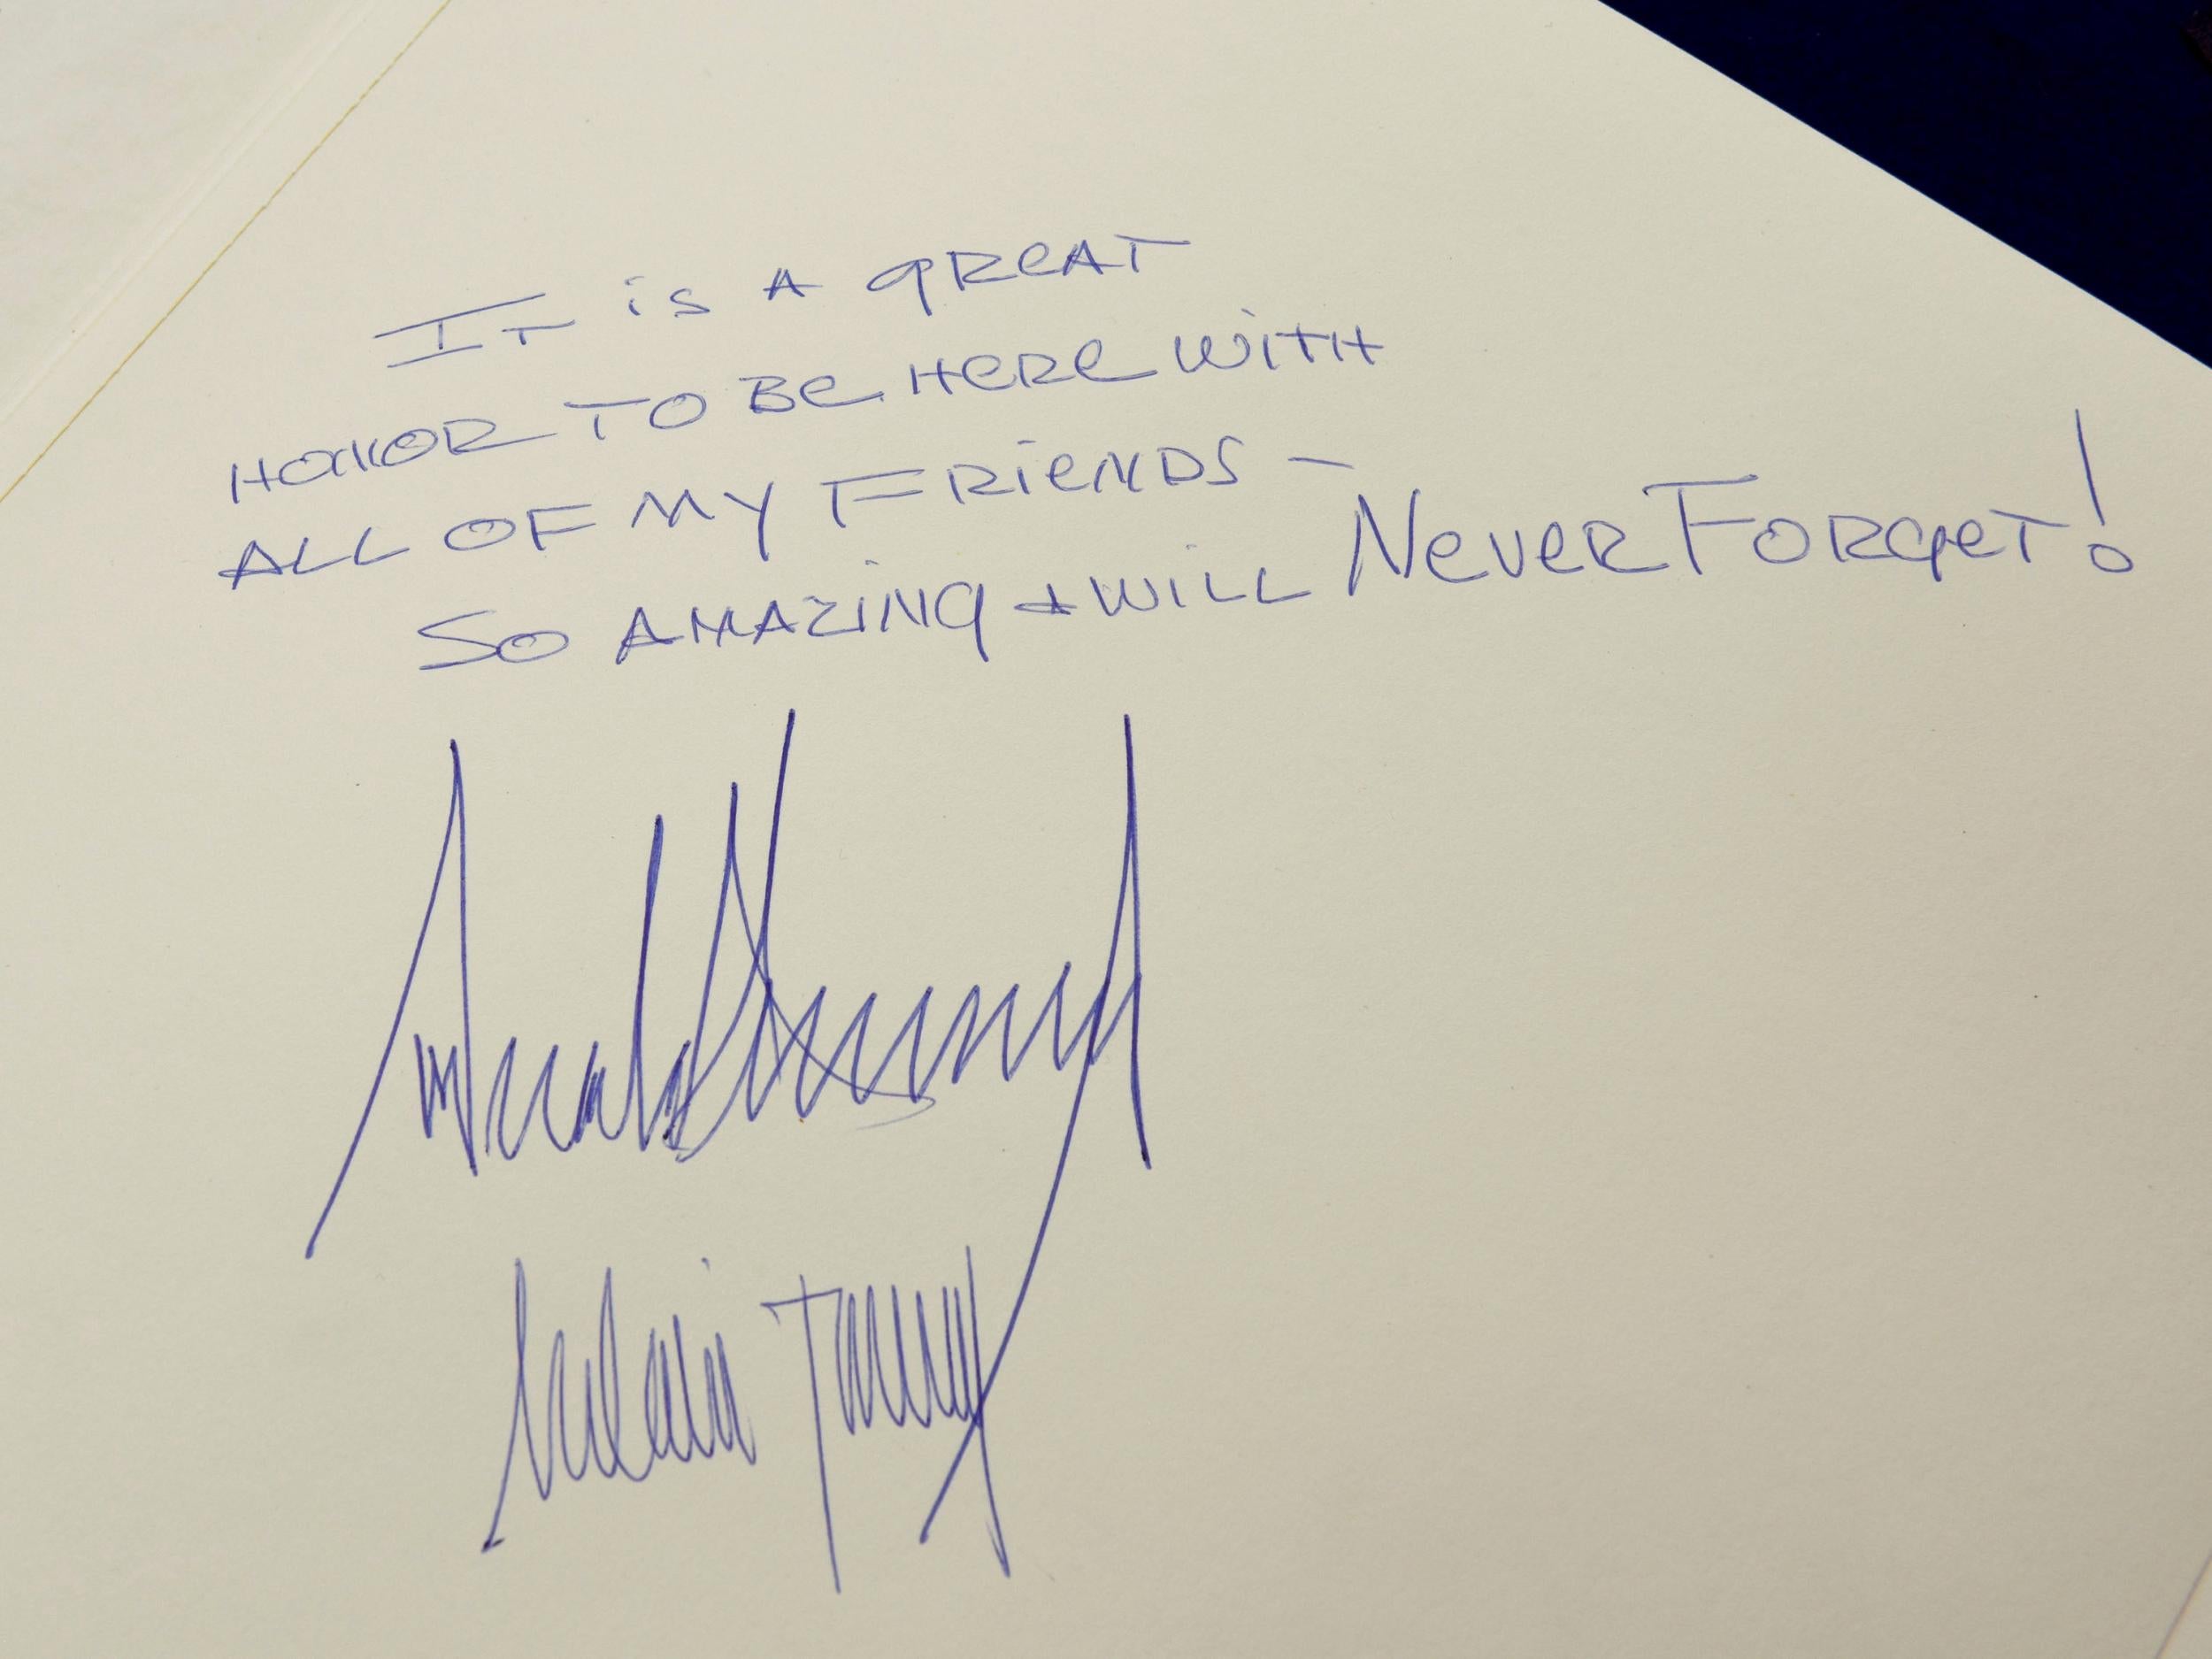 The message written by US President Donald Trump and his wife Melania at the Yad Vashem Holocaust Museum guestbook in Jerusalem on 23 May 2017